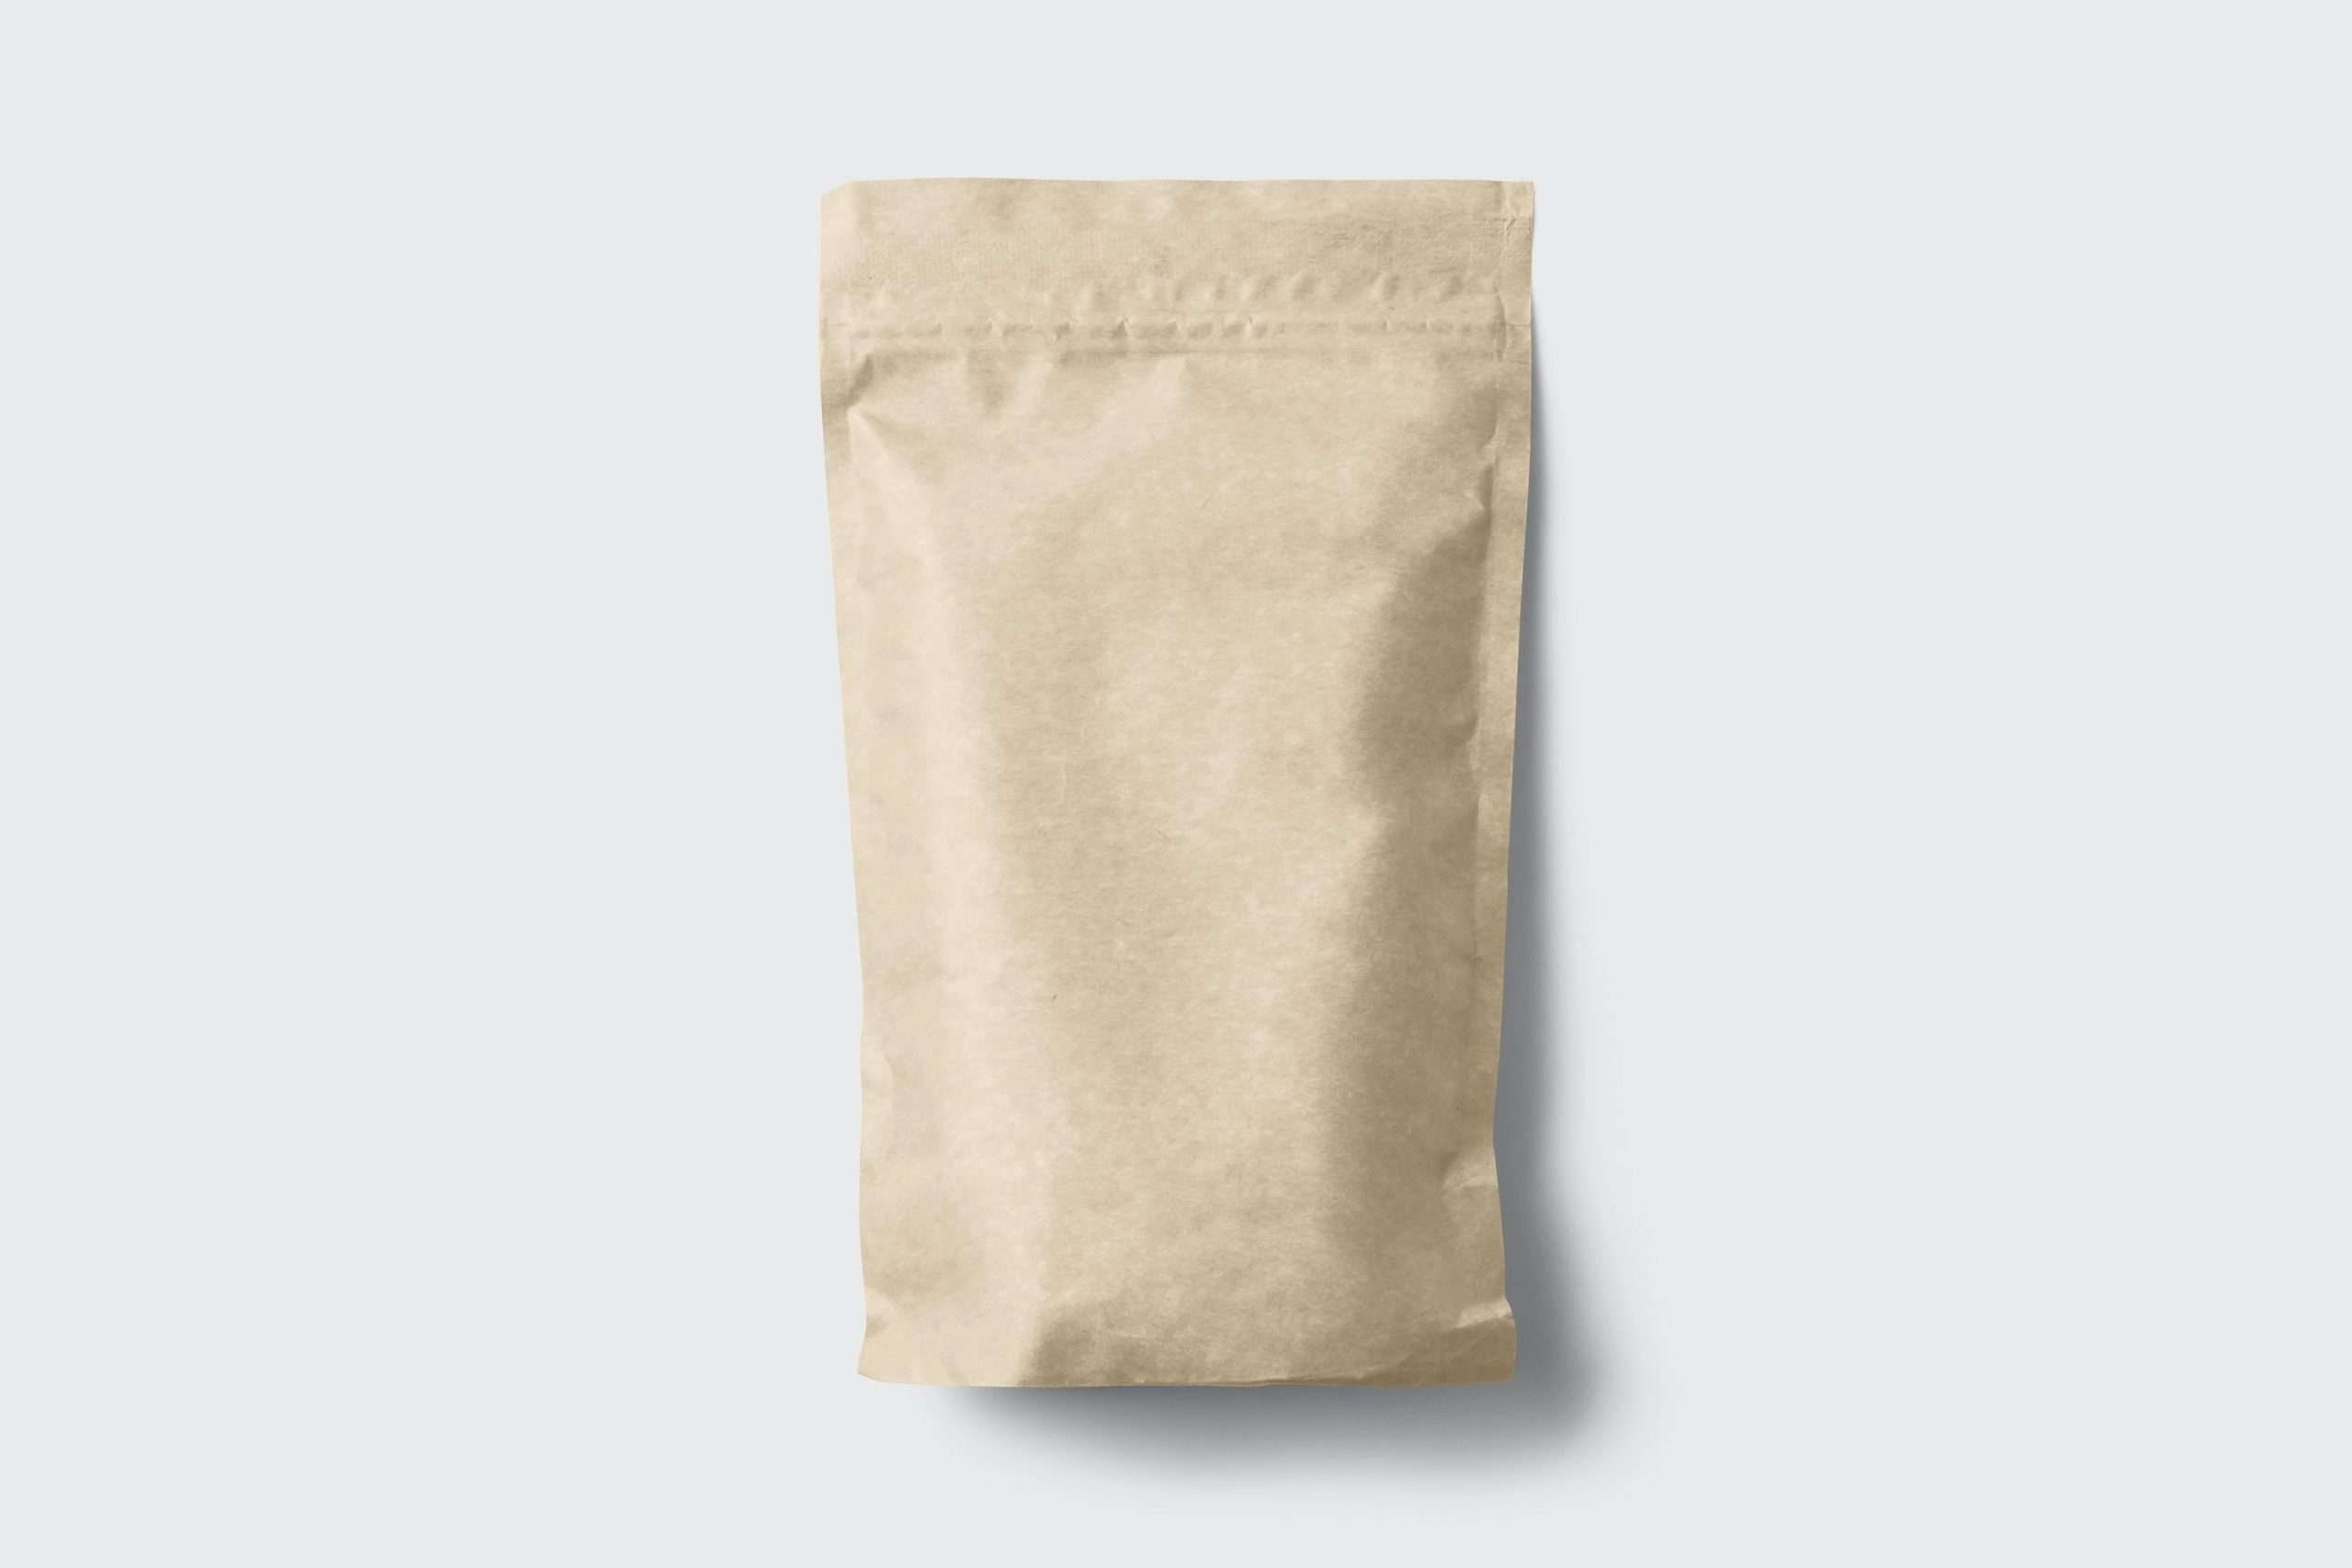 INDUSTRIAL SACKS AND BAGS